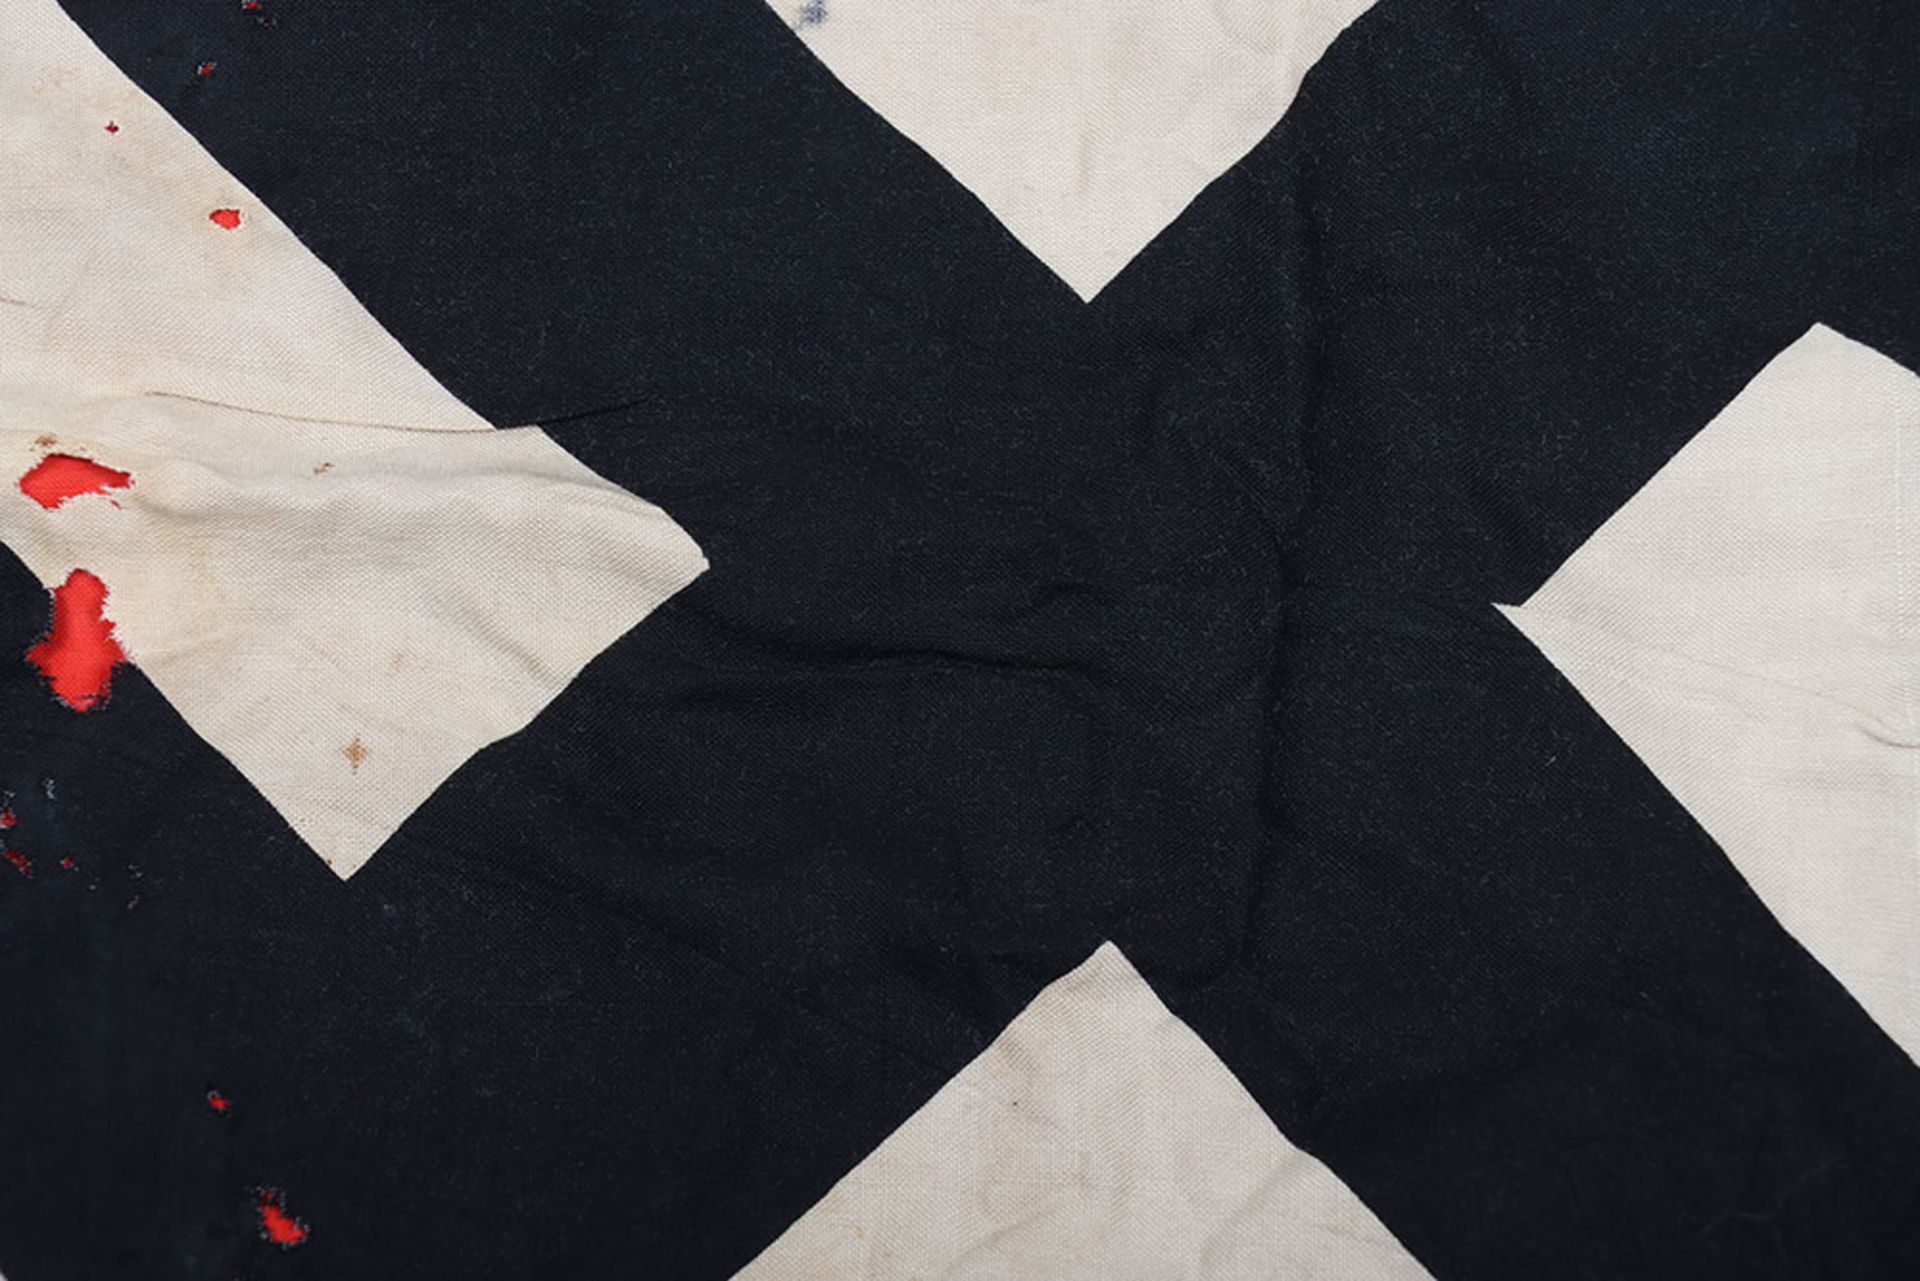 WW2 German Flag Reputed to Have Been Captured on Omaha Beach D-Day 6th June 1944 - Image 4 of 9